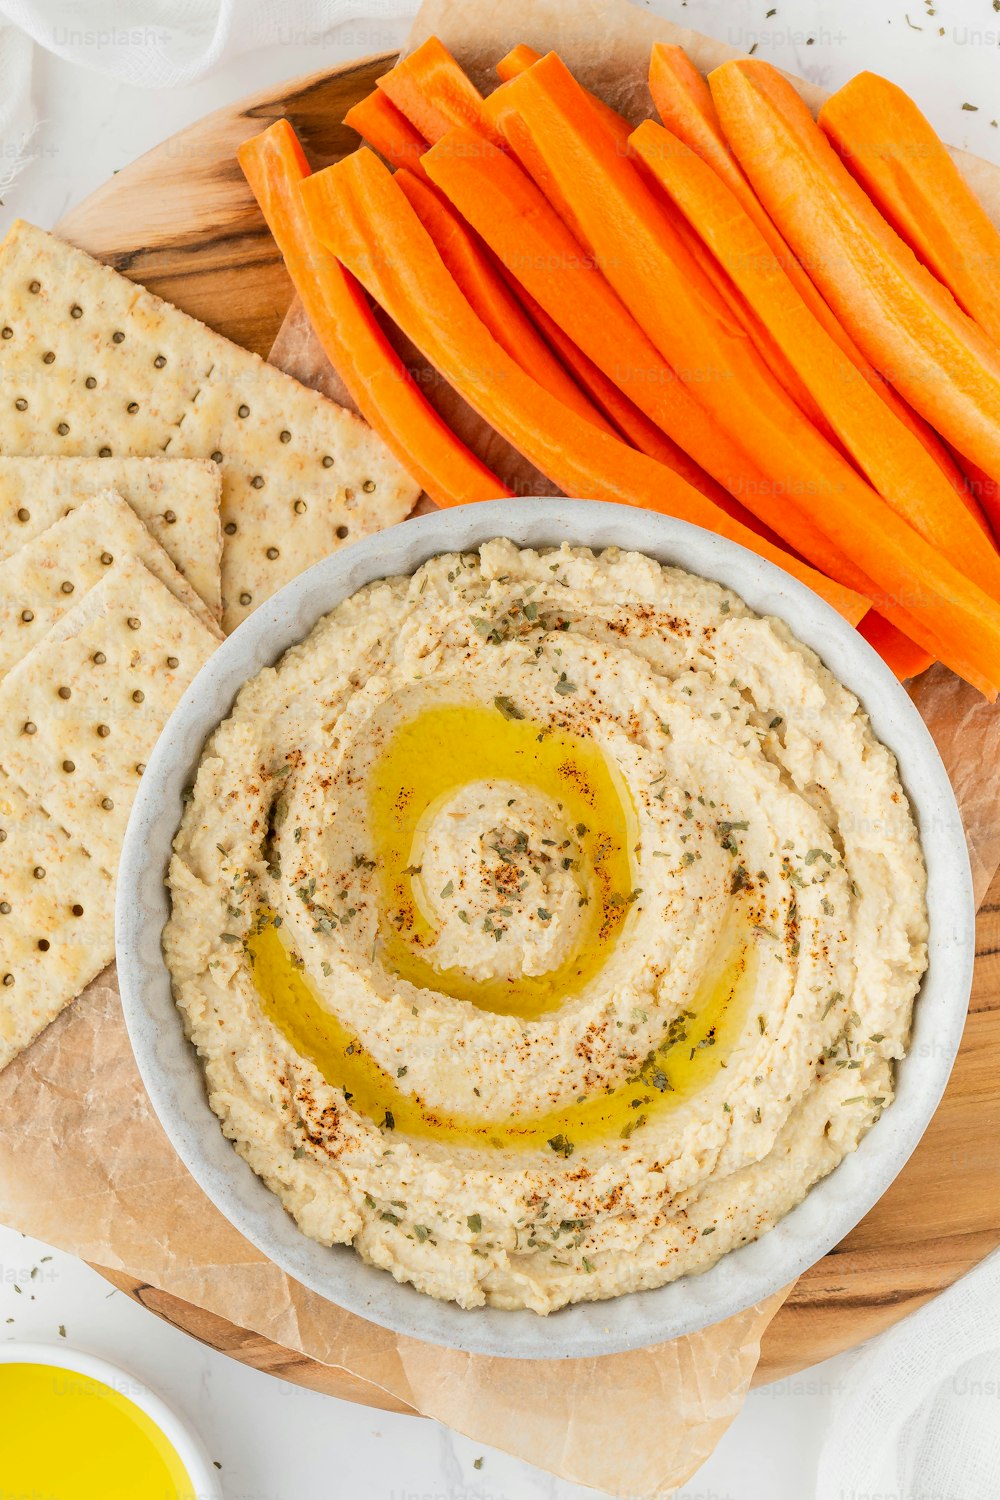 a bowl of hummus with carrots and crackers